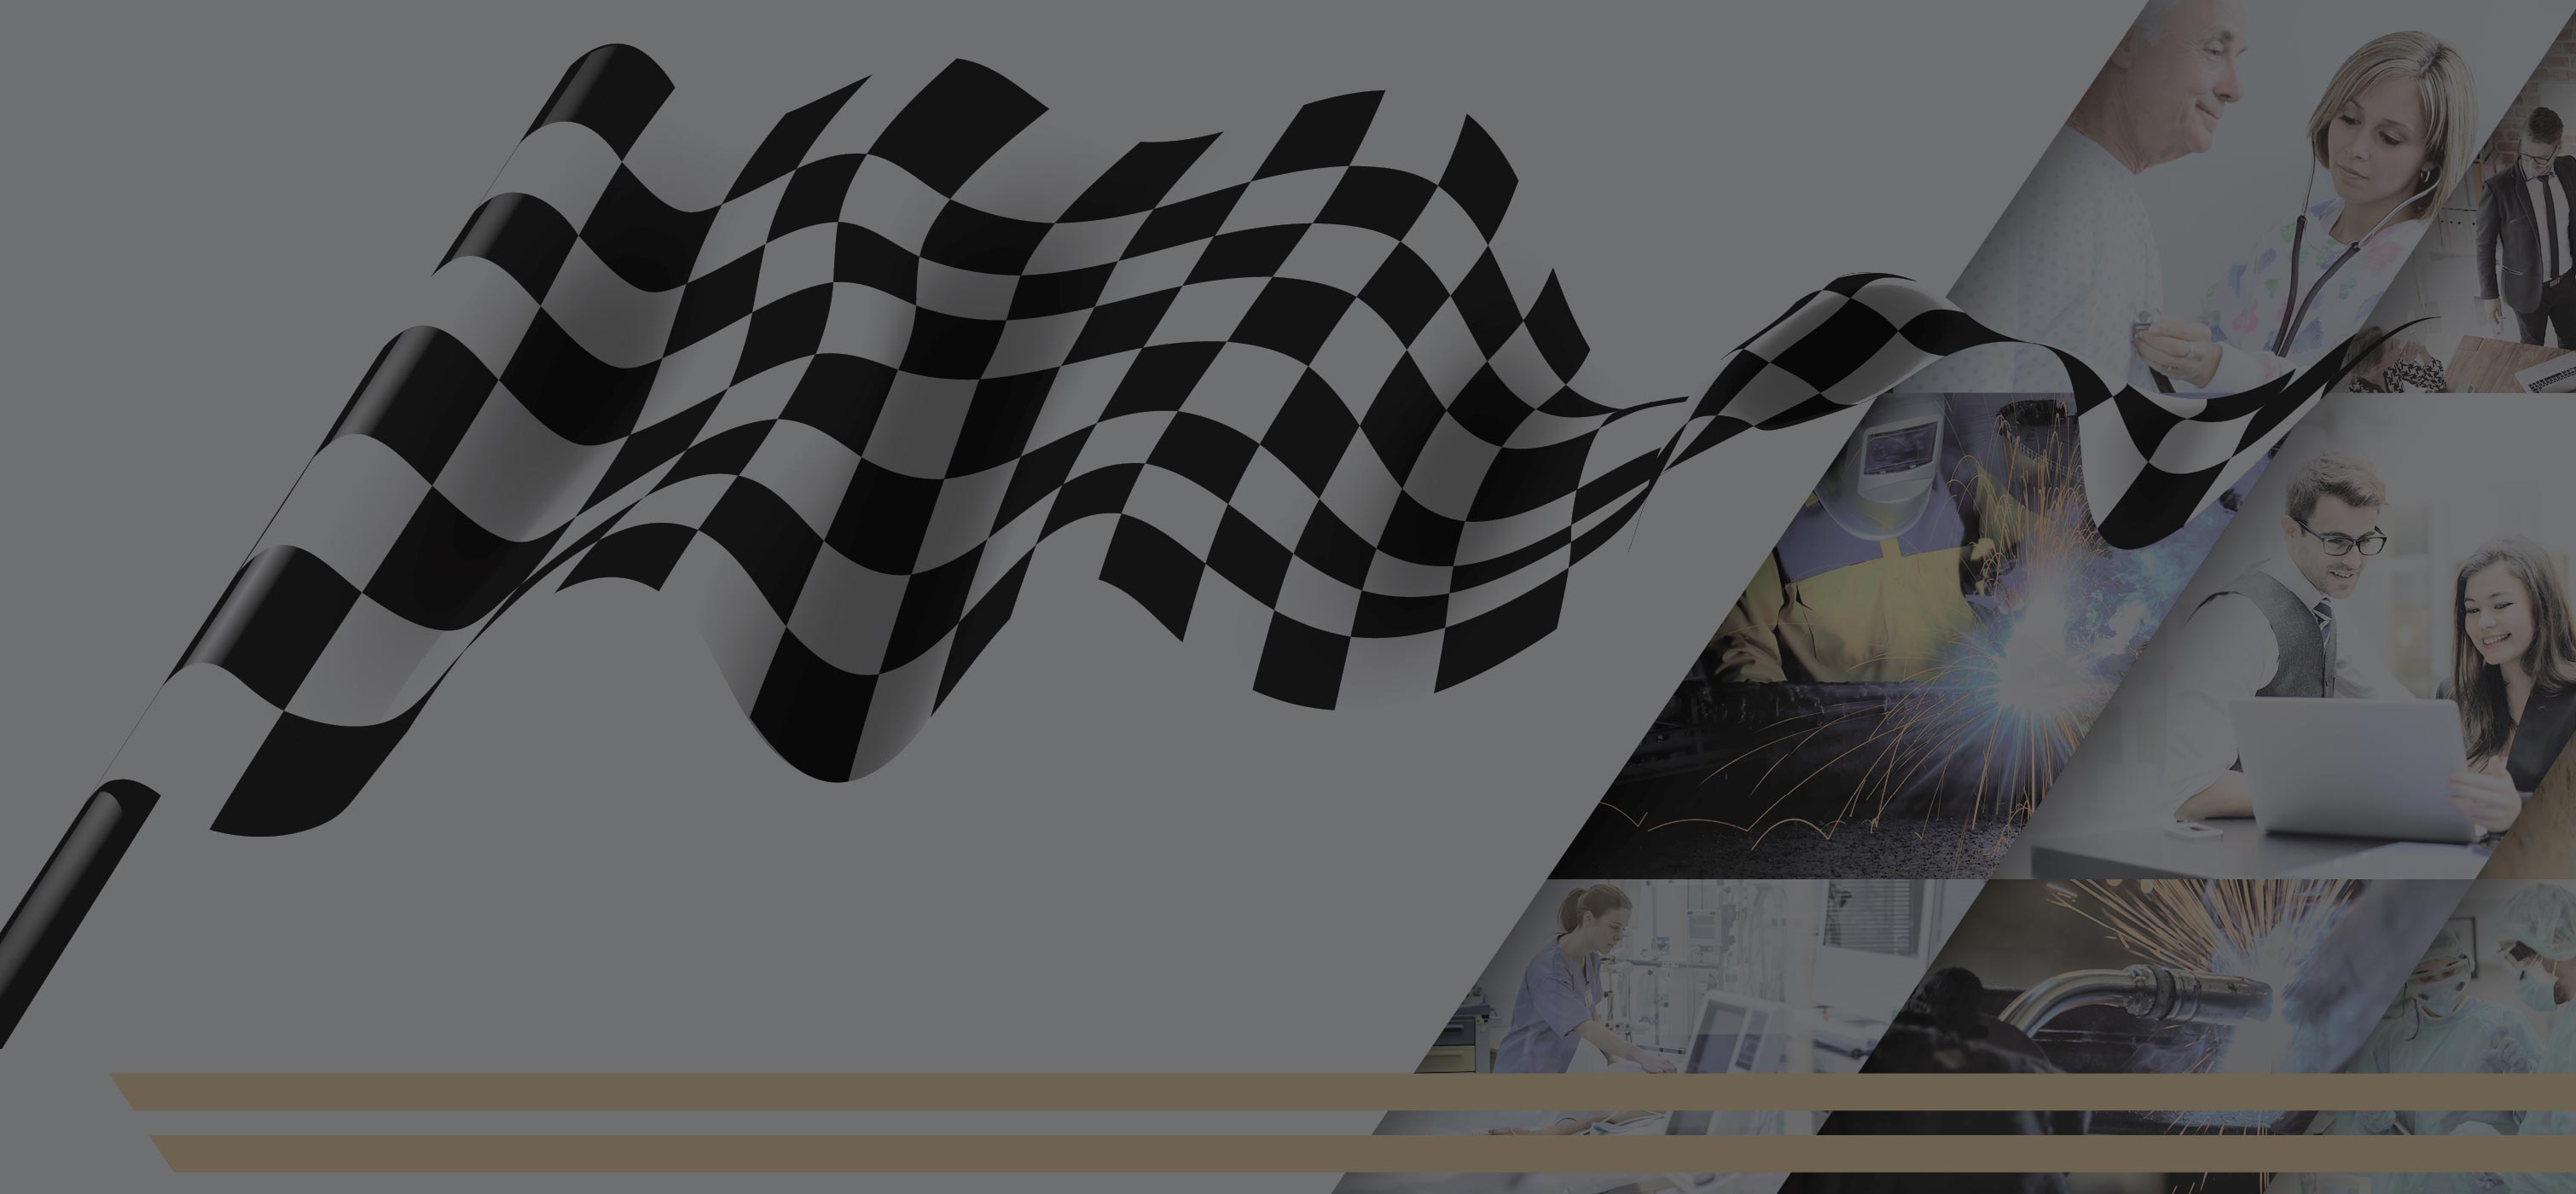 Checkered Flag, collage of images representing, business, healthcare, and welding